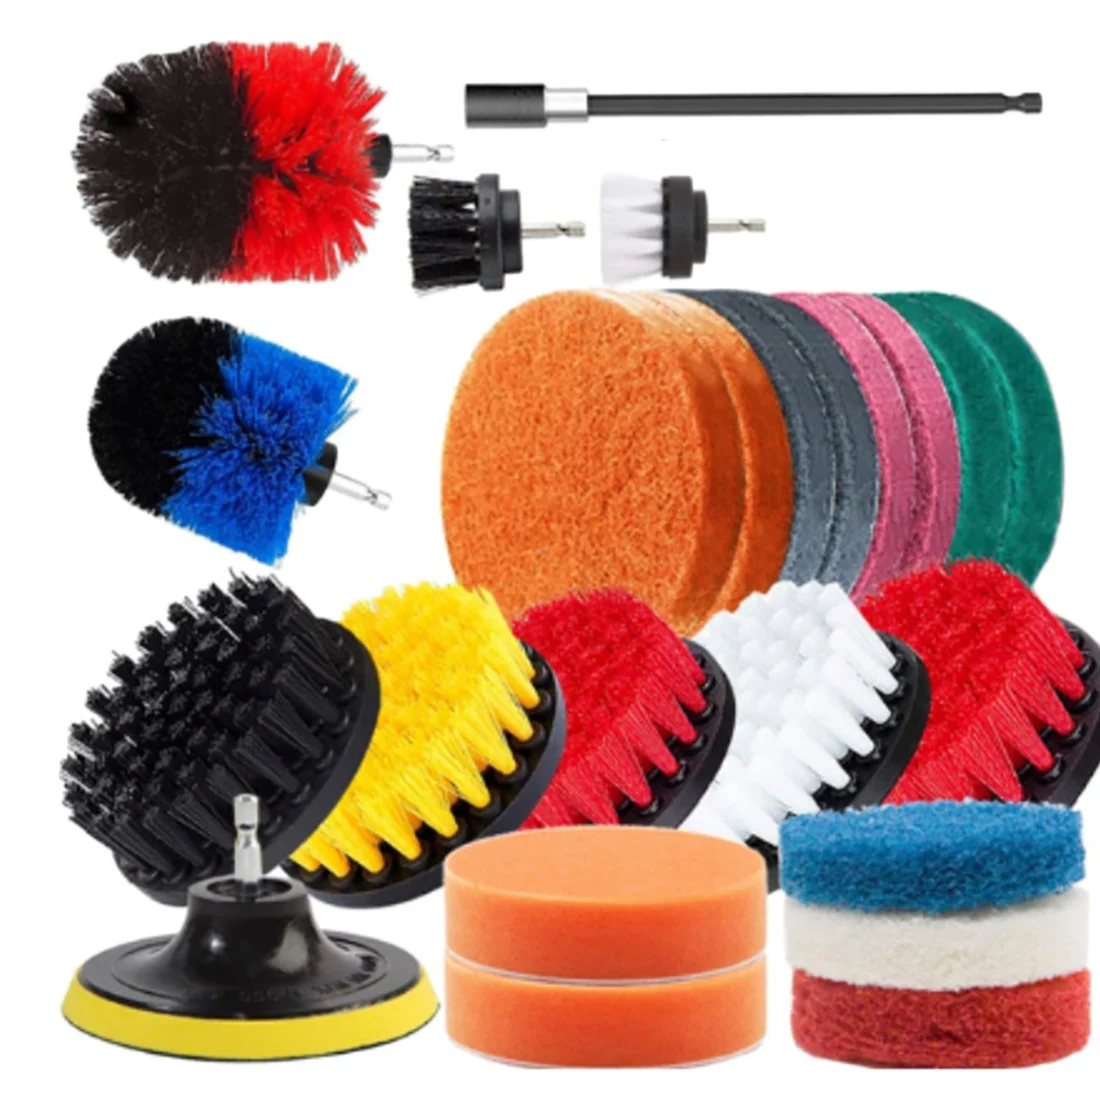 

25 Pcs Drill Brush Attachments Set,Power Scrubber Brush with Extend Long Attachment All Purpose Clean for Car, Kitchen